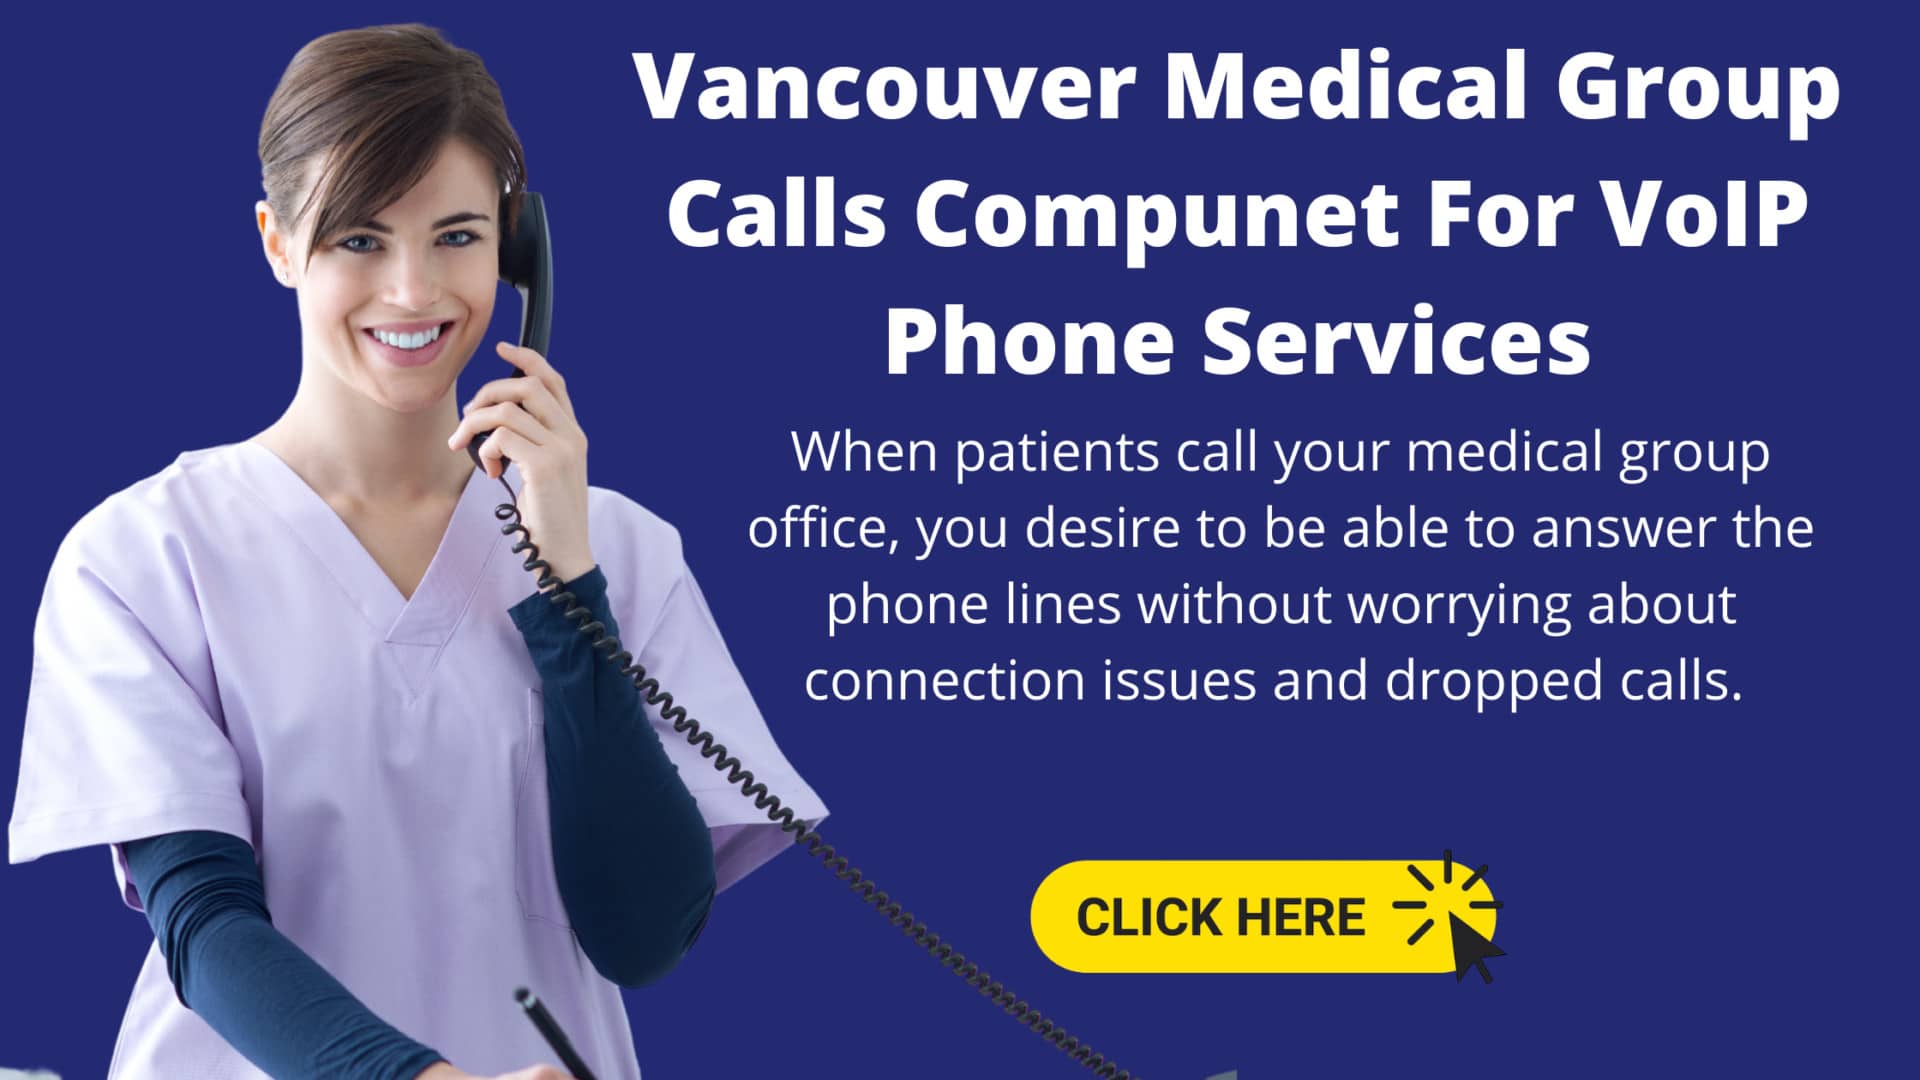 Vancouver Medical Group Calls Compunet For VoIP Phone Services